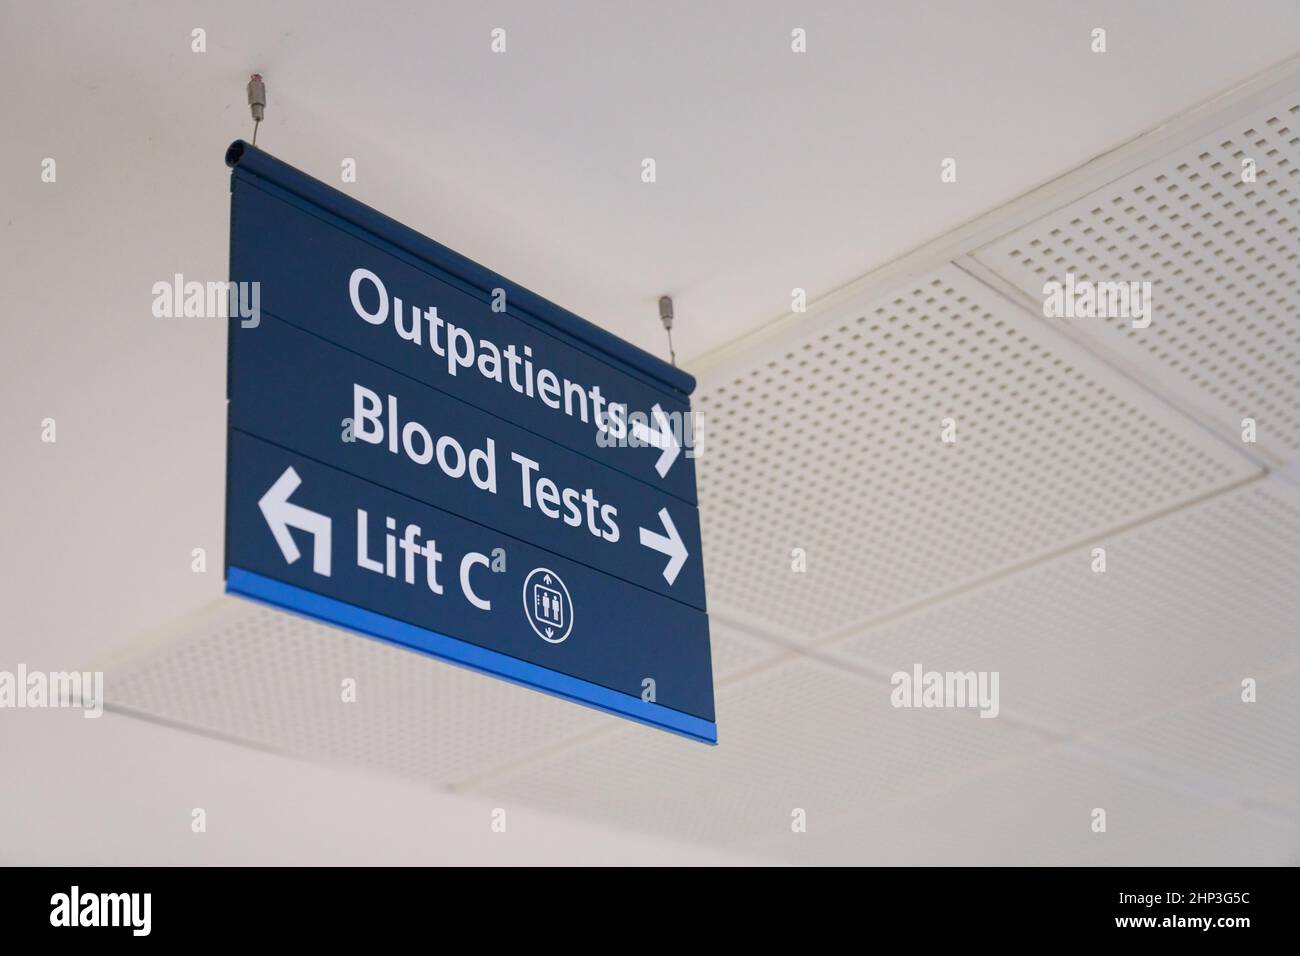 Hospital Outpatients Sign Stock Photo